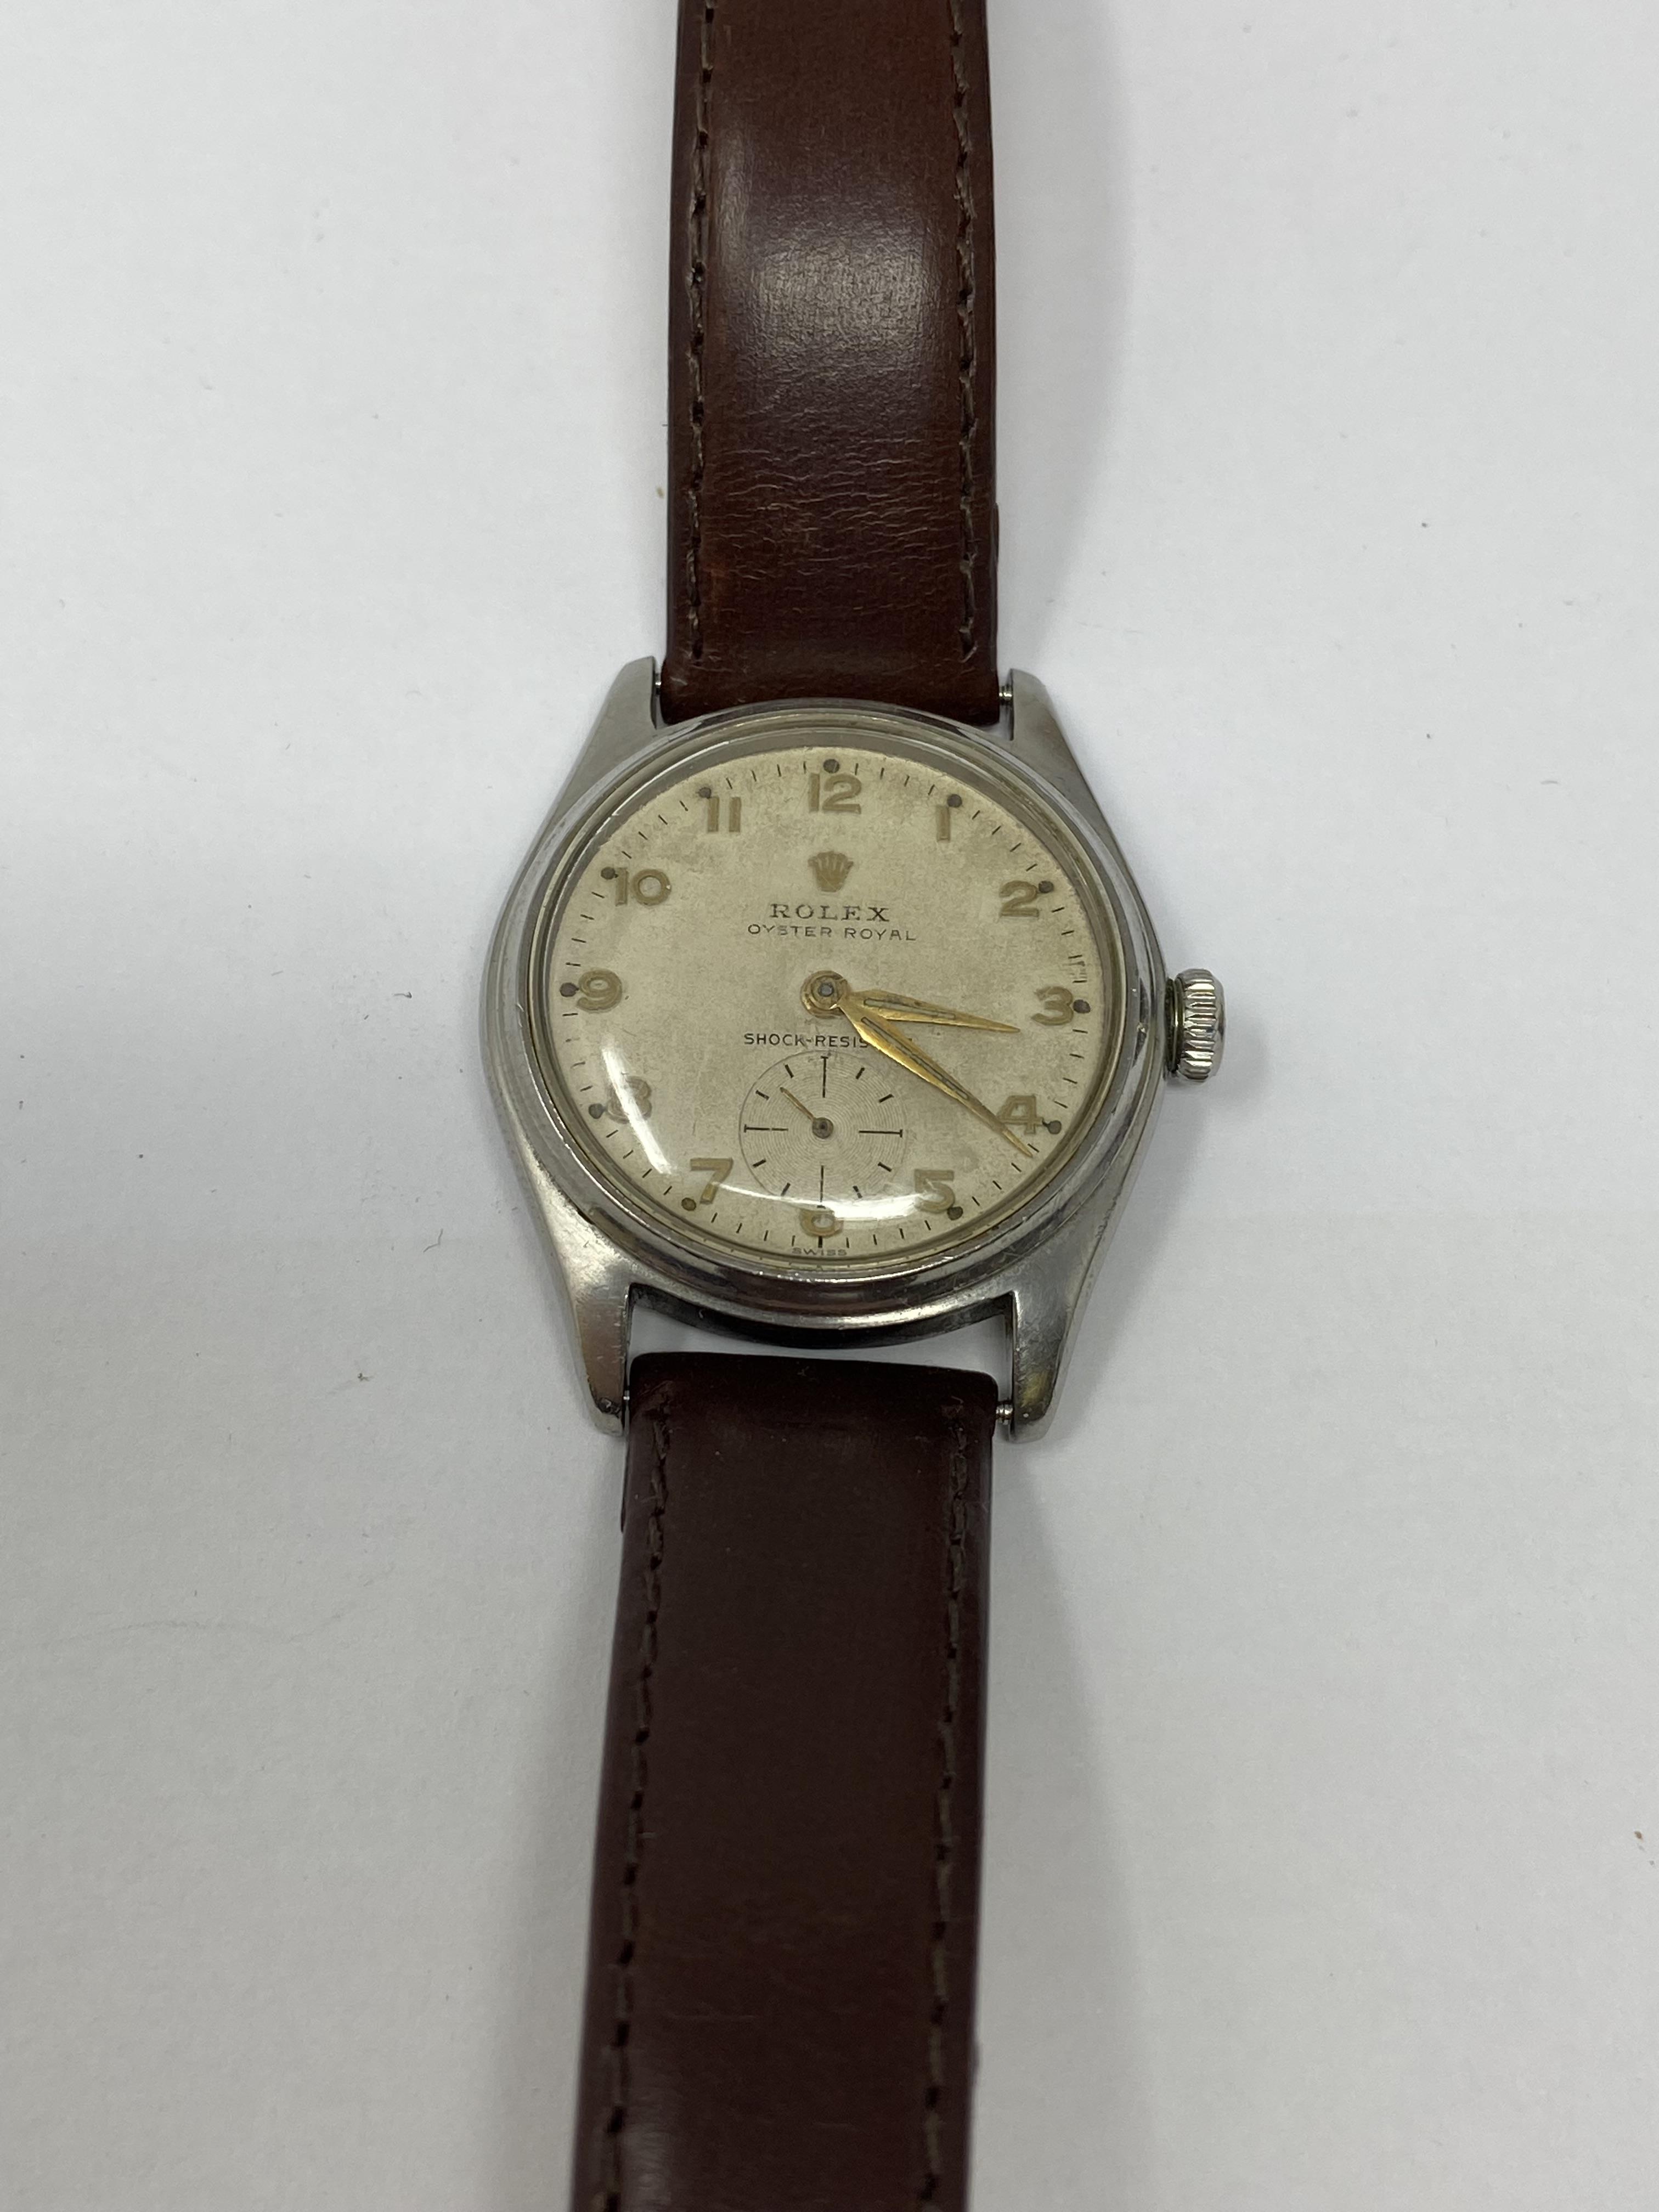 ROLEX OYSTER ROYAL, REF.6044: A MID SIZE STAINLESS STEEL WRISTWATCH, CIRCA 1950 - Image 2 of 5